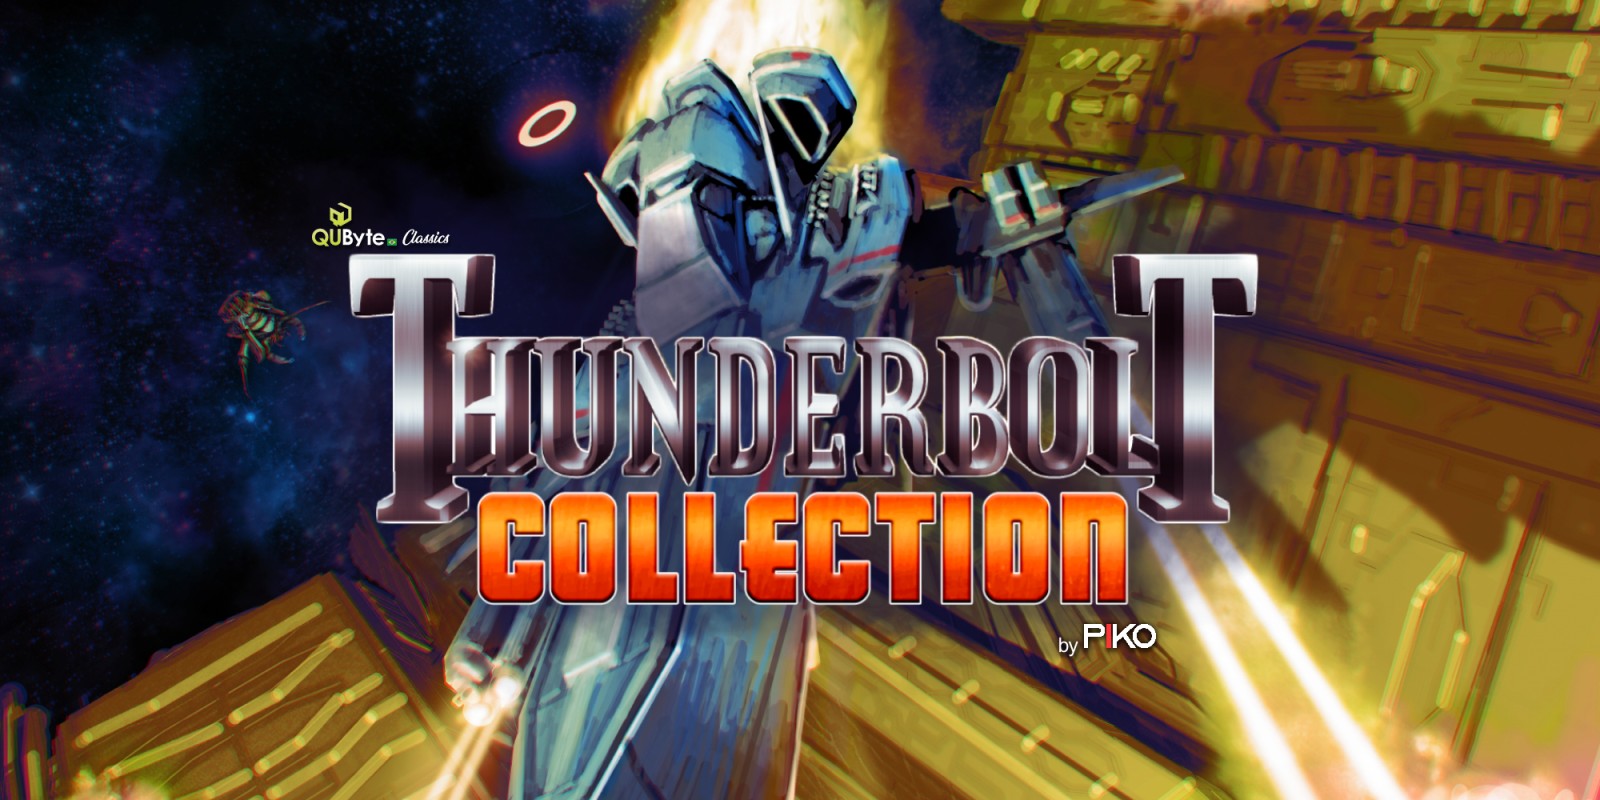 QUByte Classics: Thunderbolt Collection by PIKO